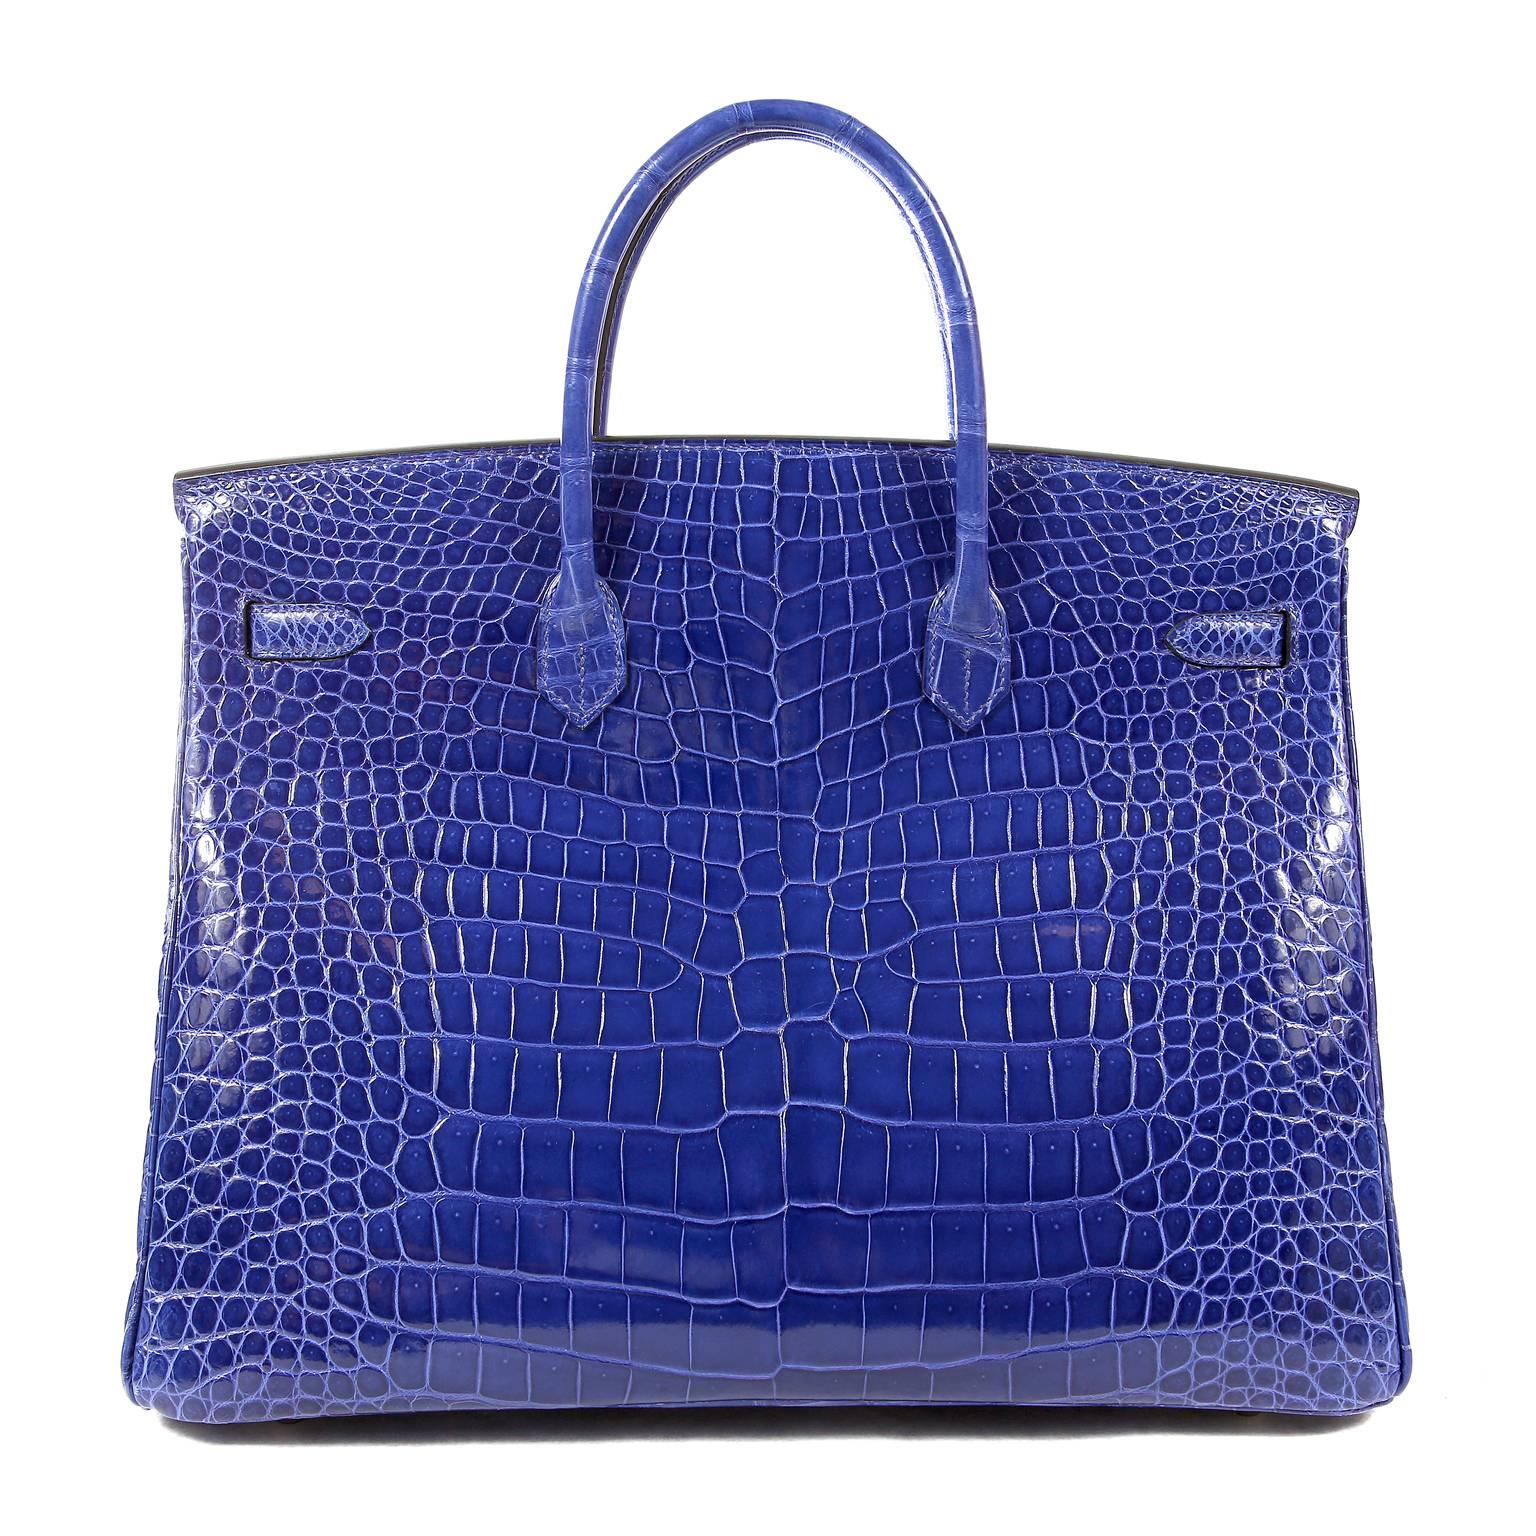 Hermès Blue Electrique Porosus Crocodile 40 cm Birkin- Pristine Condition; appears never before carried. 
Hermès bags are considered the ultimate luxury item the world over.  Hand stitched by skilled craftsmen, wait lists of a year or more are